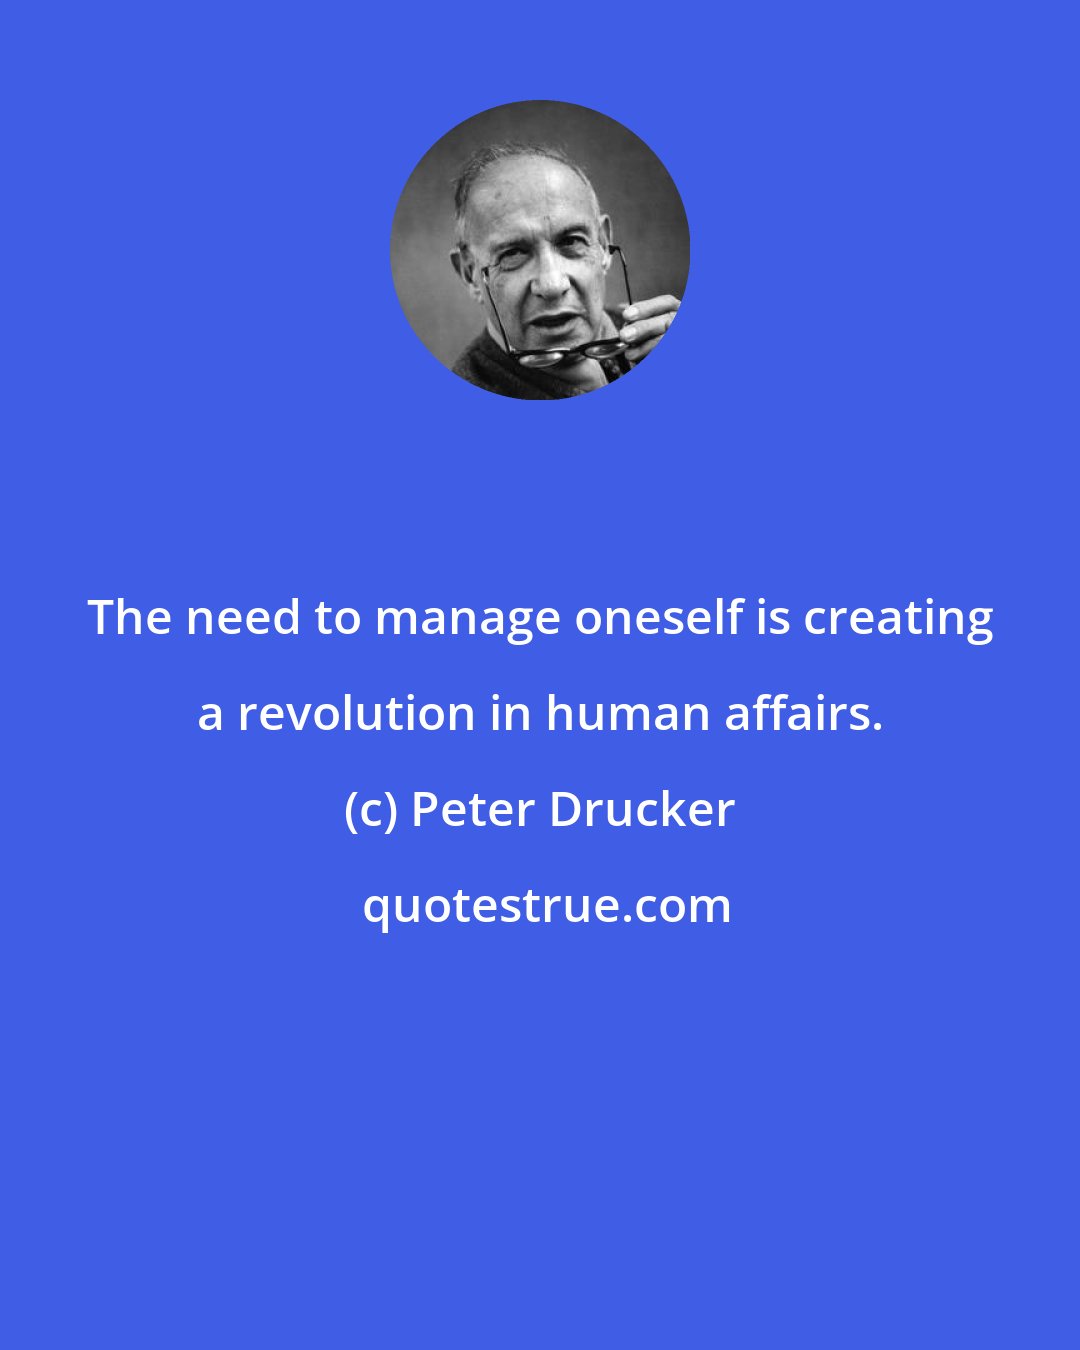 Peter Drucker: The need to manage oneself is creating a revolution in human affairs.